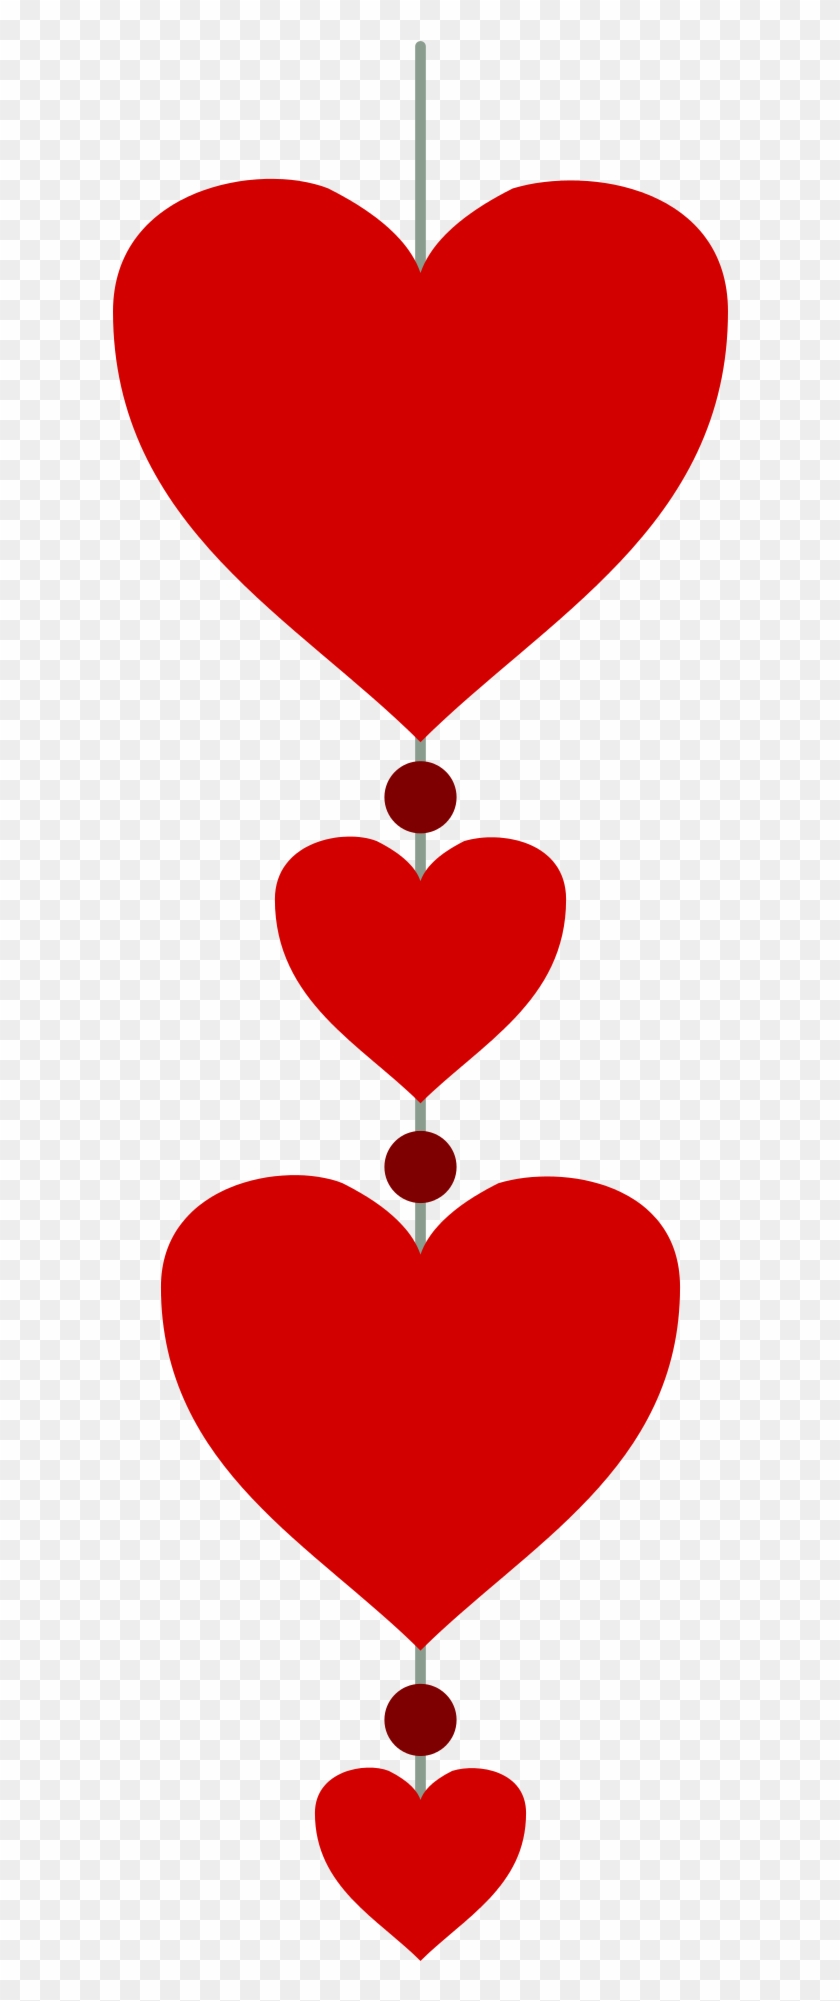 Hearts In A Vertical Line Png Image - Valentins Herz Png Clipart